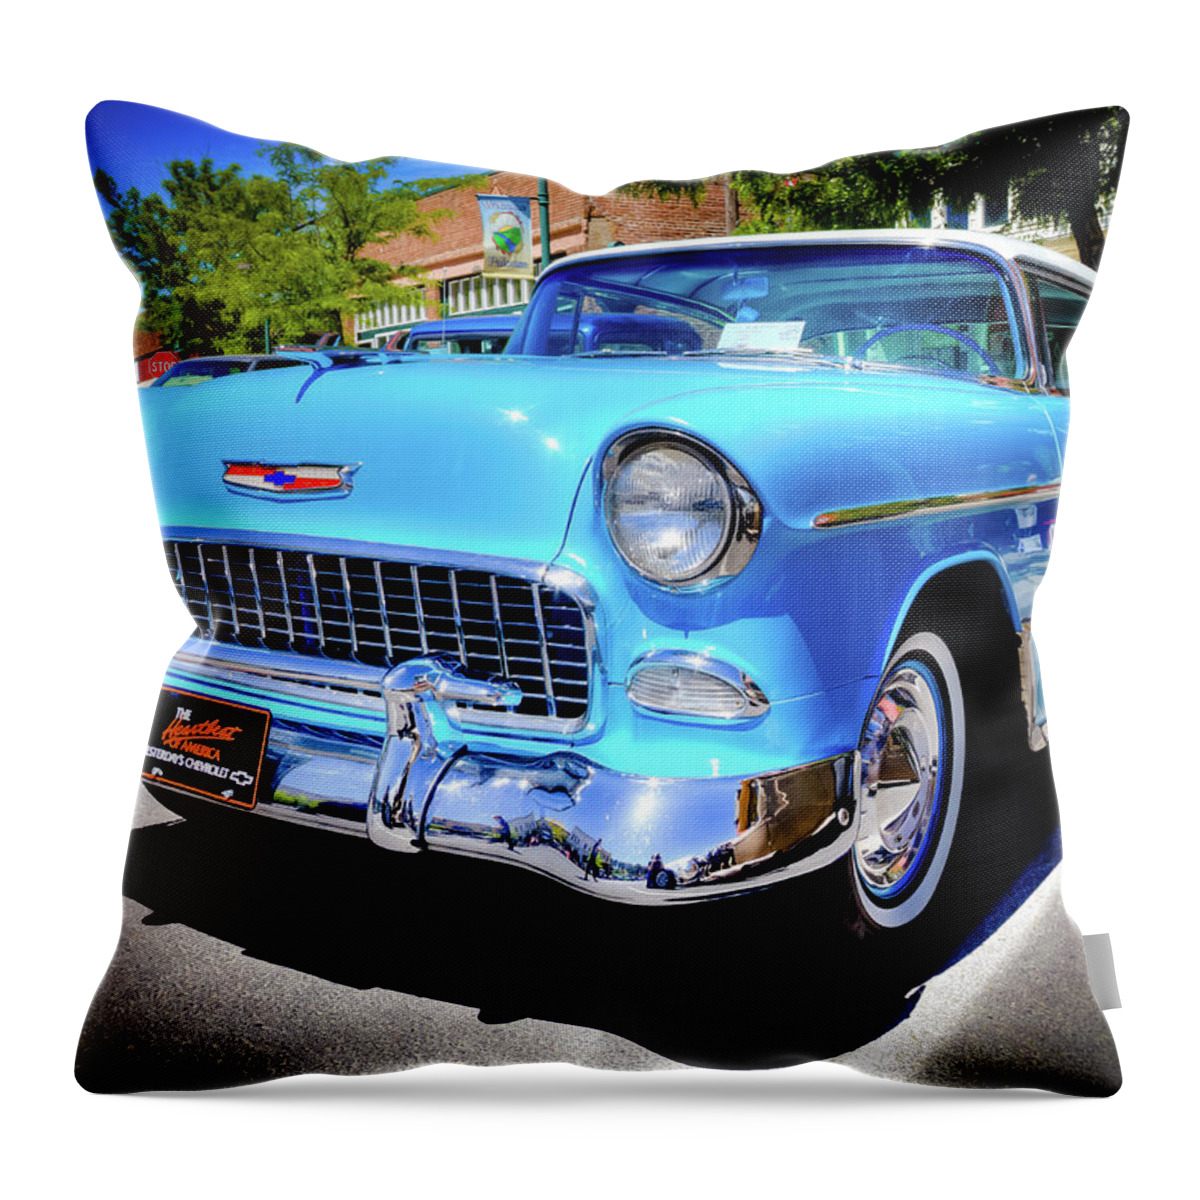 1955 Chevy Baby Blue Throw Pillow featuring the photograph 1955 Chevy Baby Blue by David Patterson